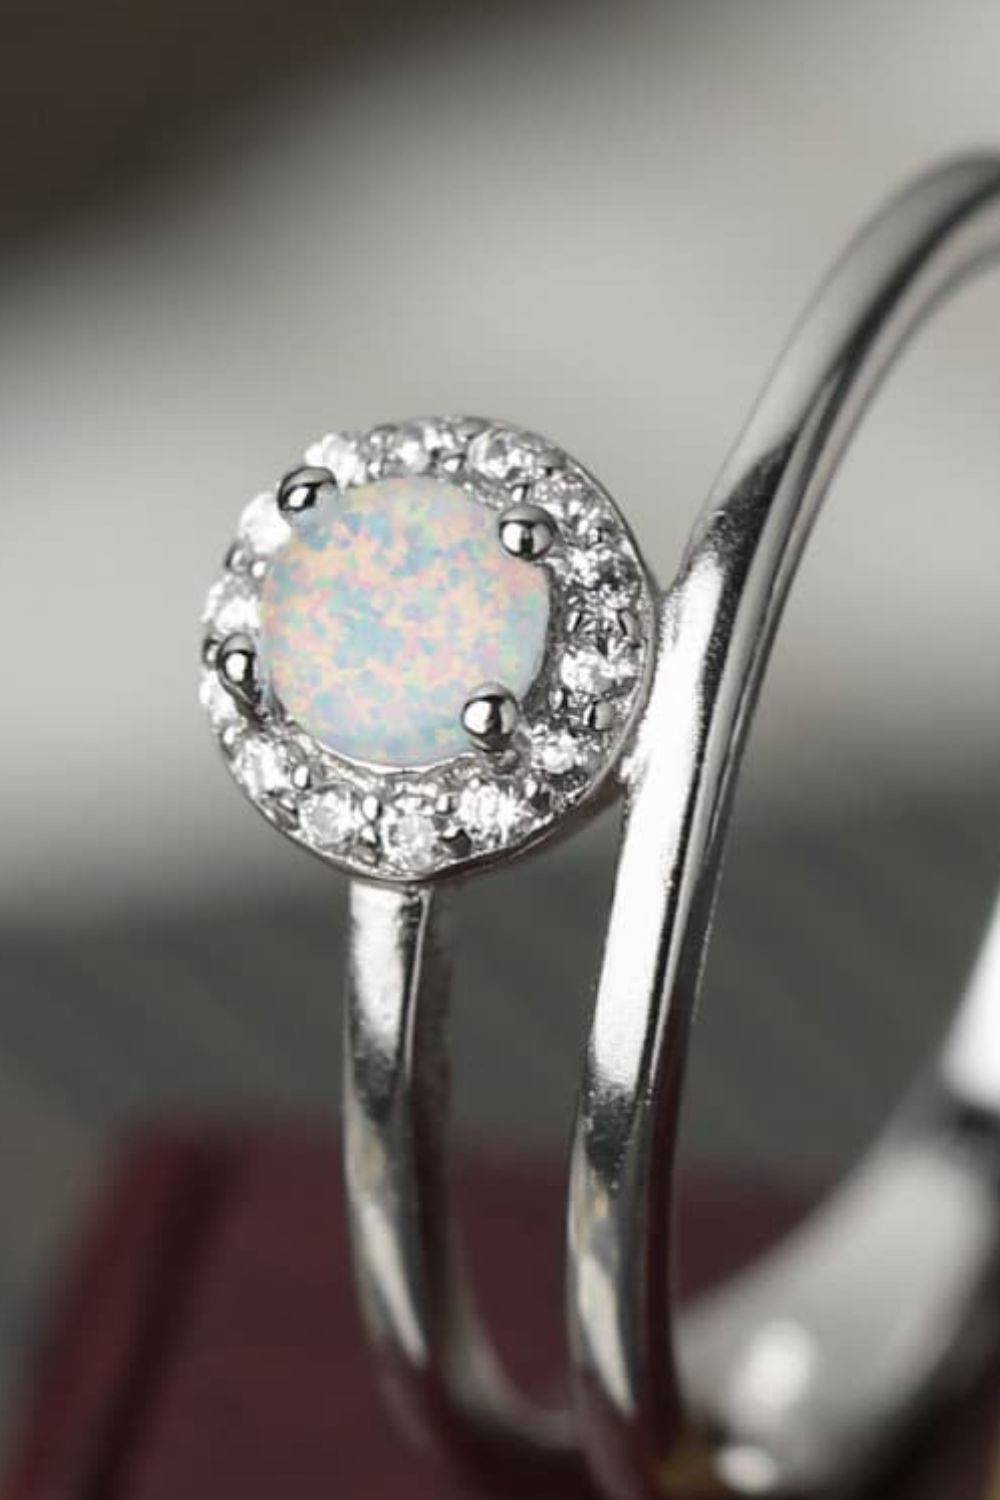 Enchanted Love - Captivate your loved one with our Opal Bypass Ring - A mesmerizing symbol of passion and elegance - Guy Christopher